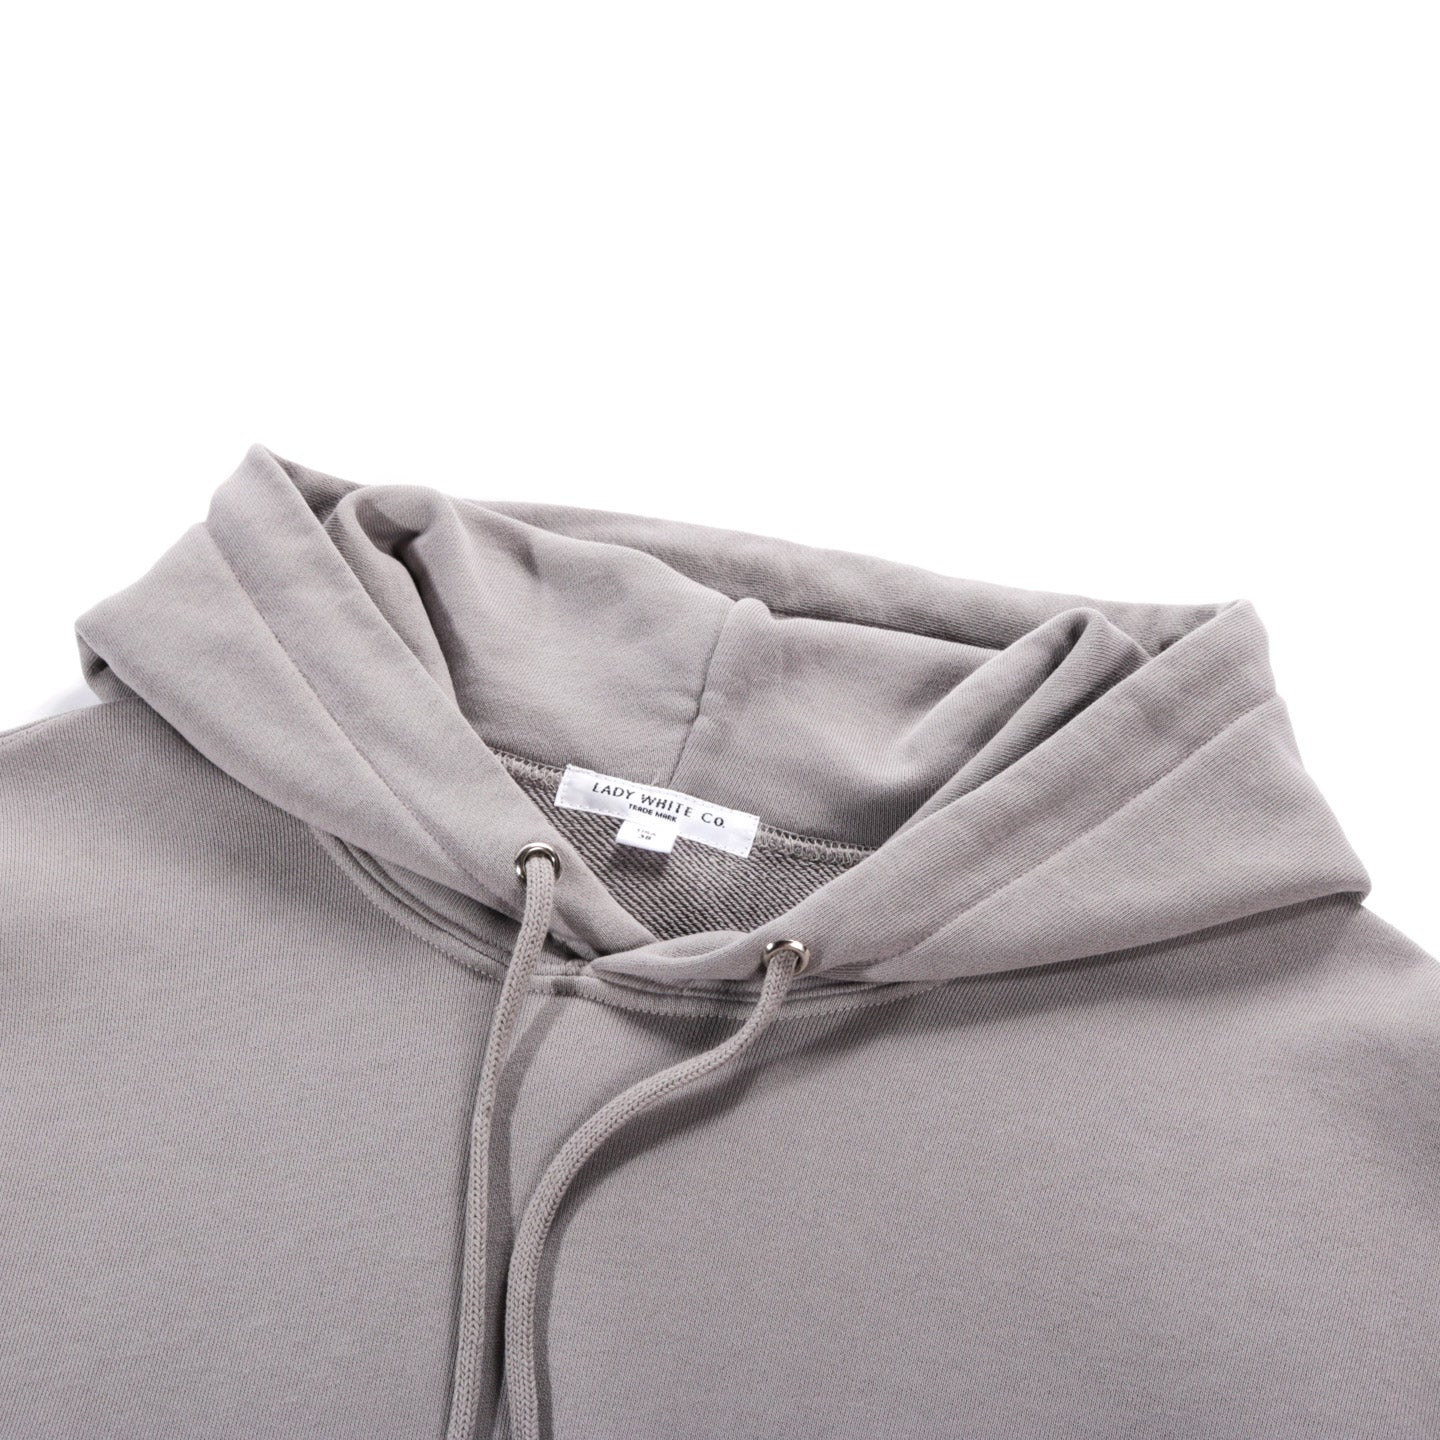 LADY WHITE CO. CLASSIC FIT HOODIE TRUE GREY